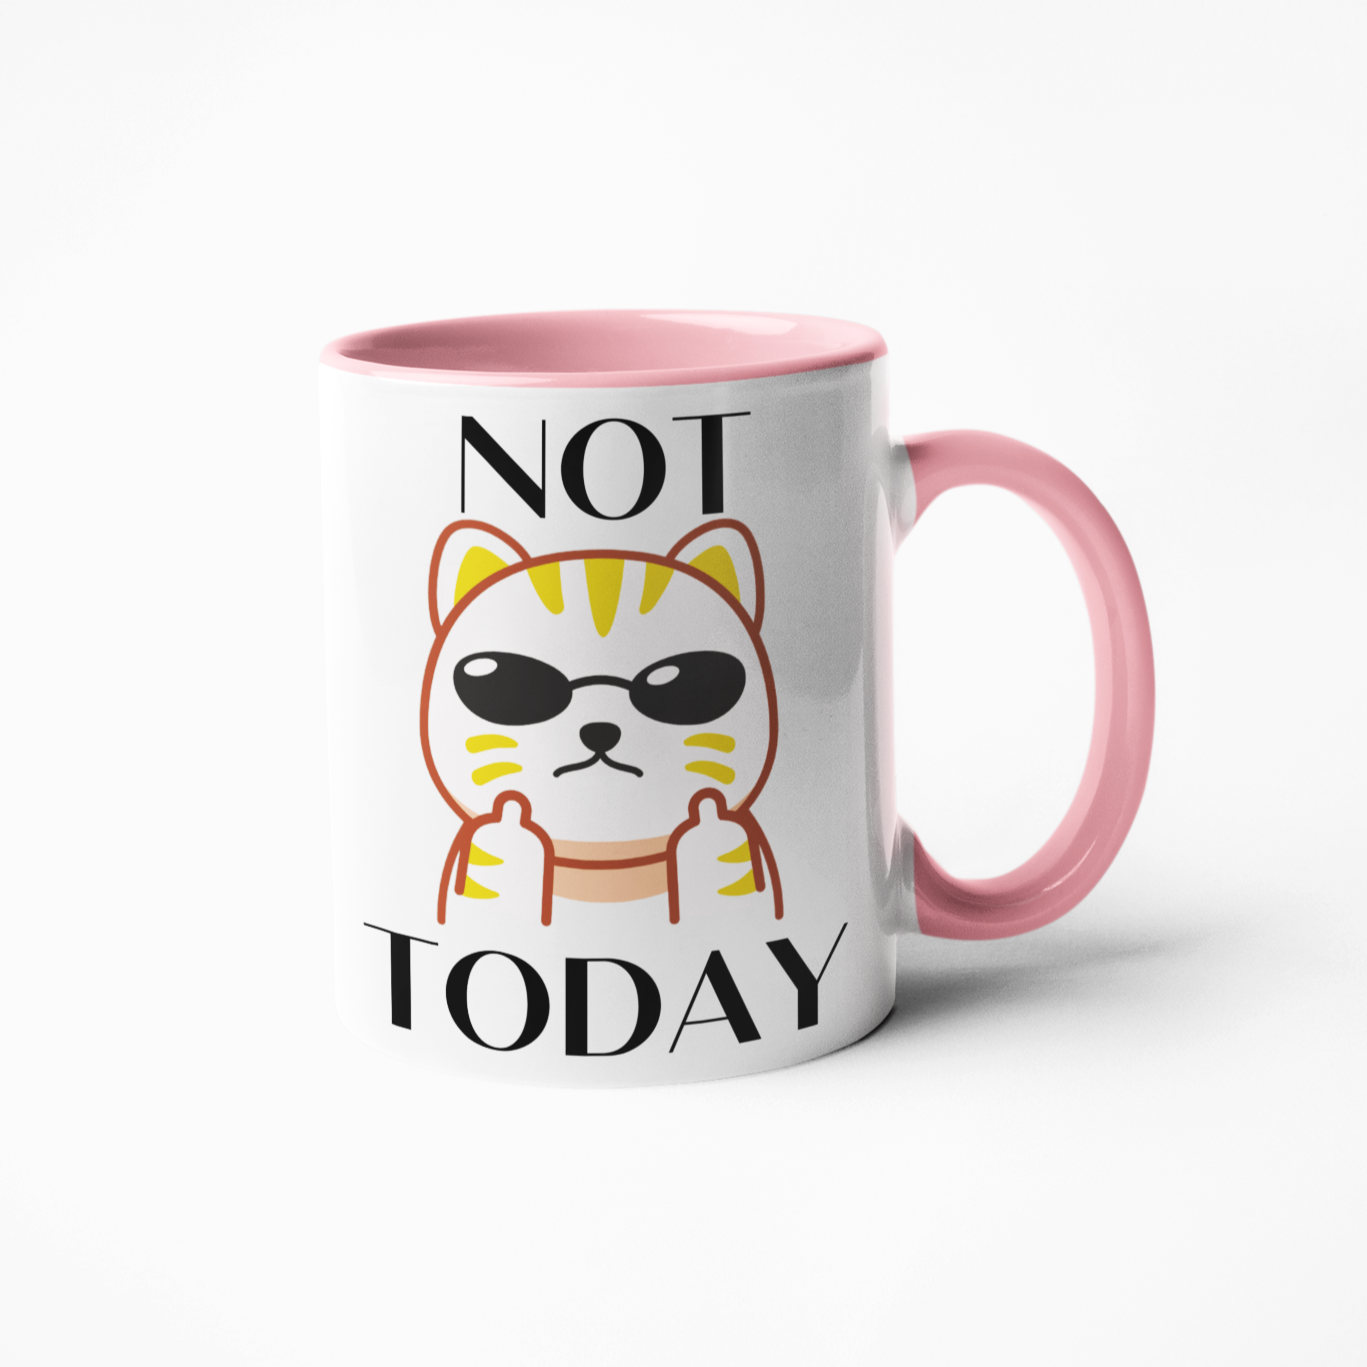 Start your morning with a motivational jolt! This Not Today Cat mug will inspire you to seize the day and take on any challenge. Let it also remind you to enjoy the journey along the way. Be bold and no matter what, don't give up! Make every cup of joe count!